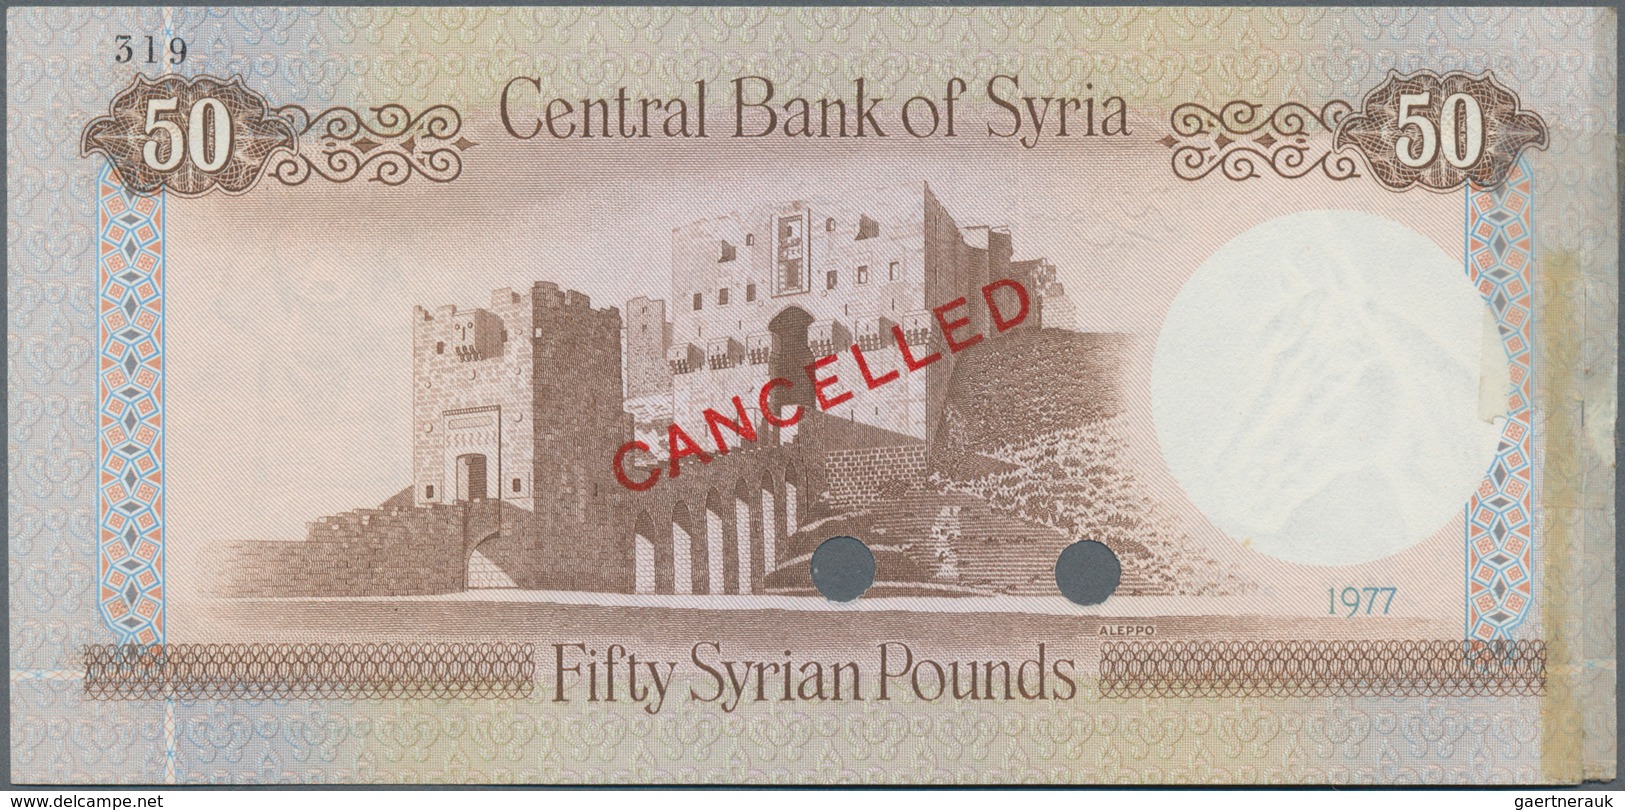 Syria / Syrien:  Central Bank Of Syria 50 Pounds 1977 SPECIMEN, P.103as, Zero Serial Number, Punch H - Syrie